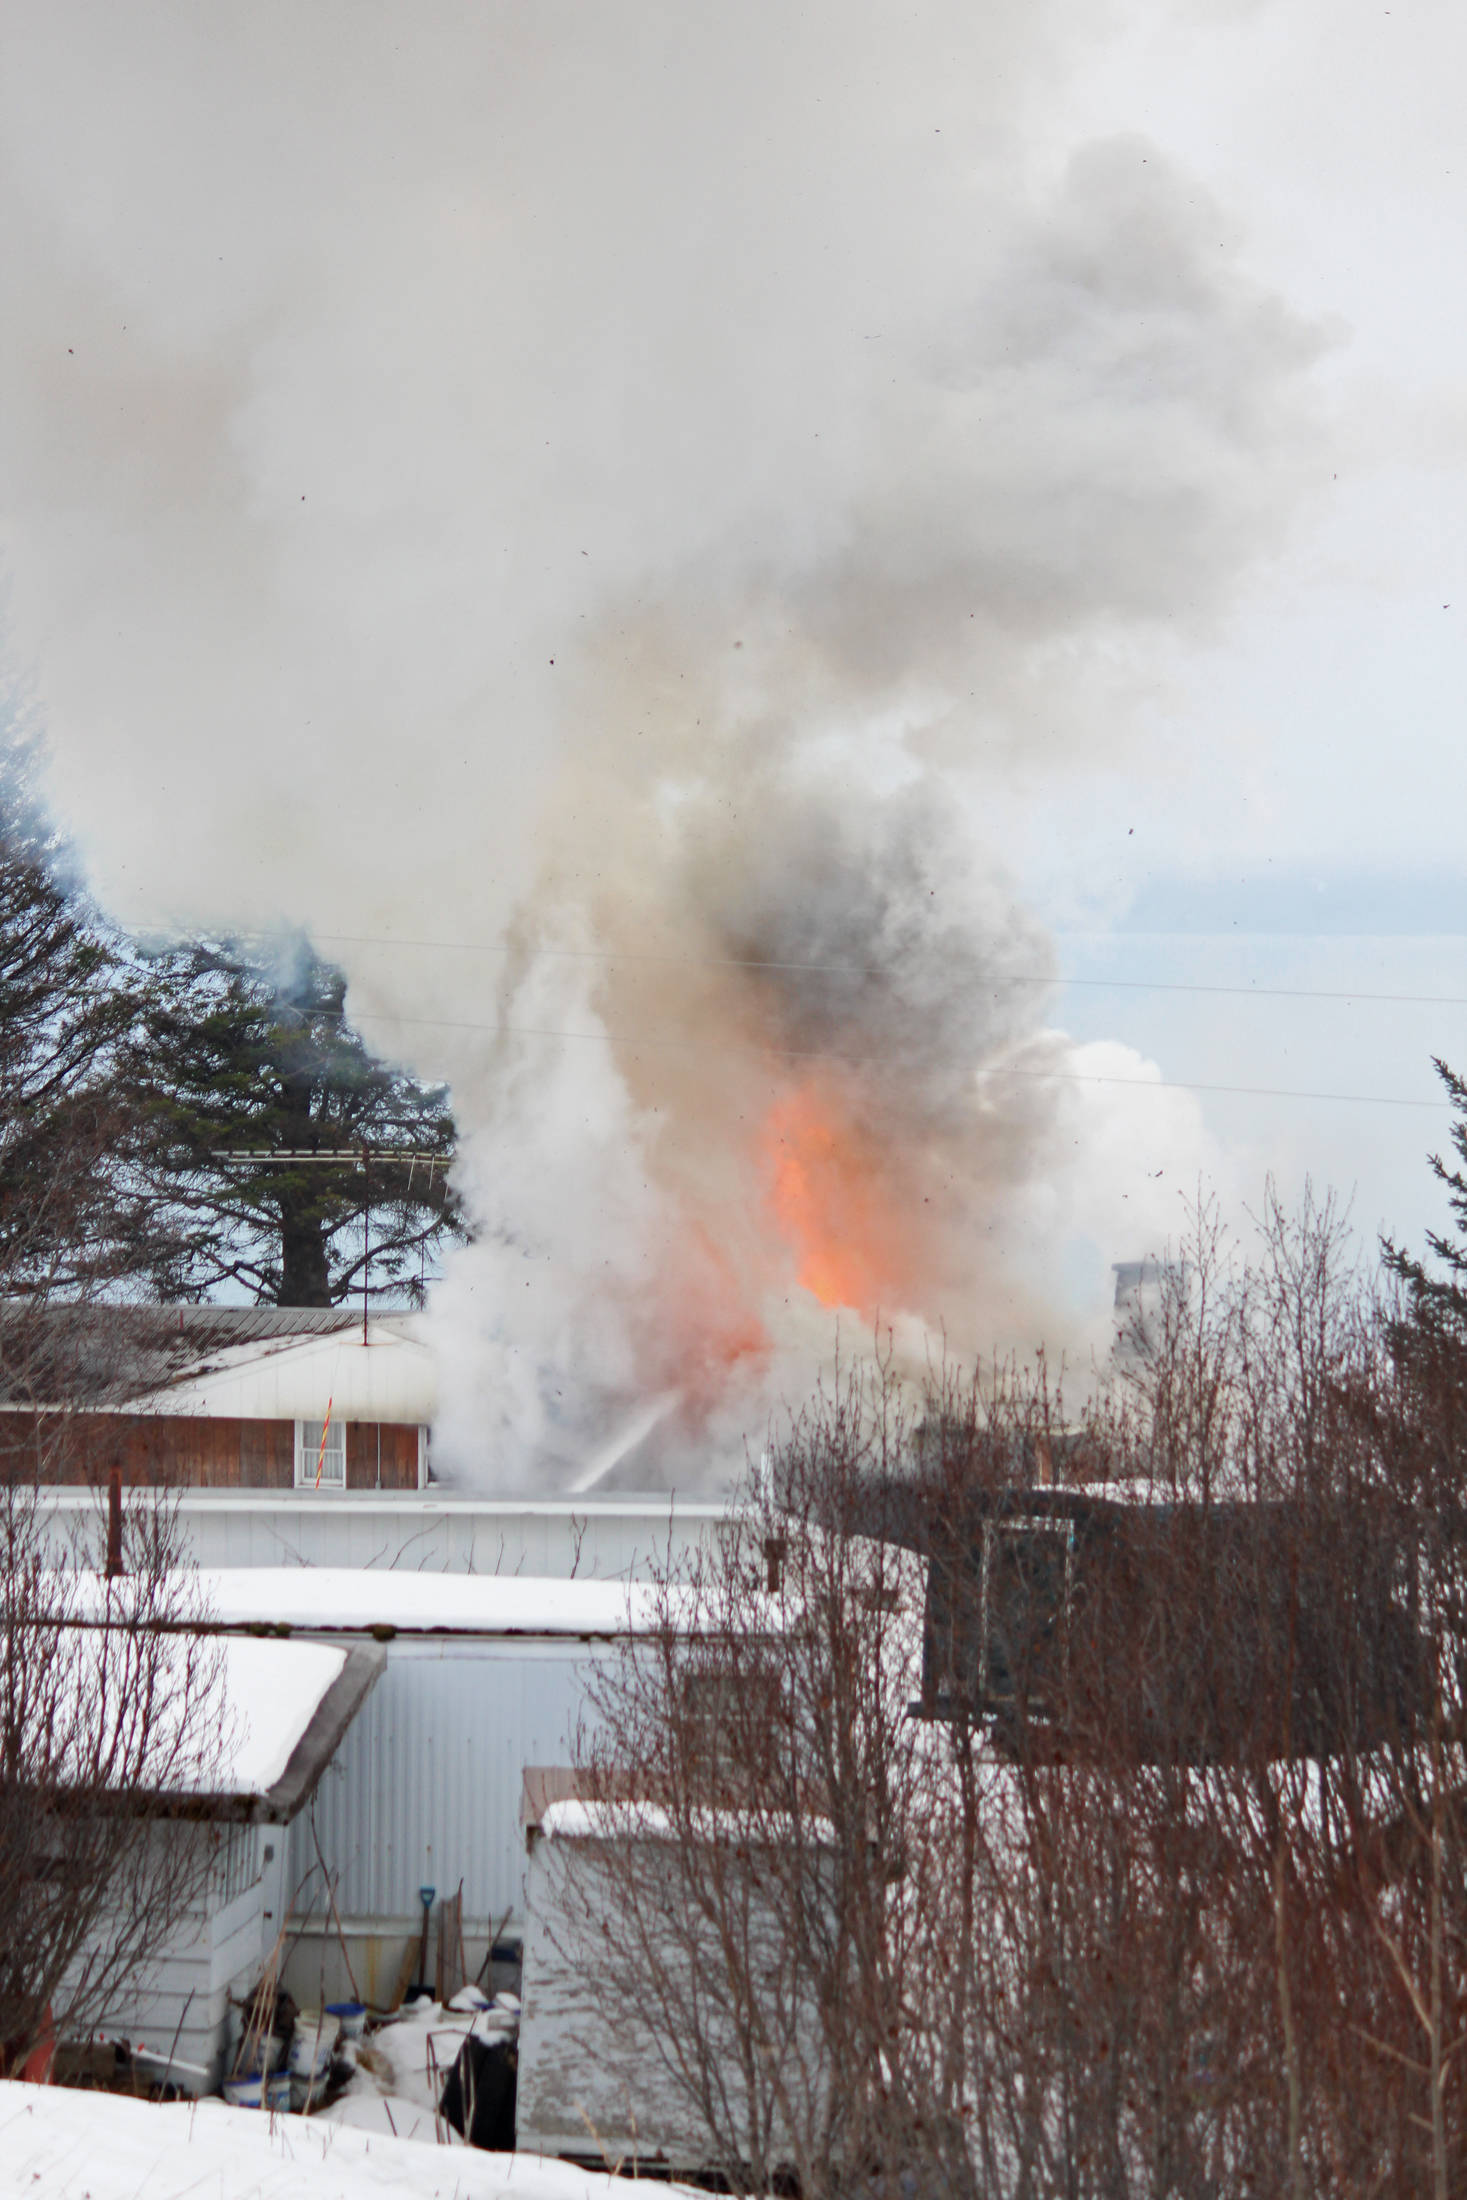 A fire at the old Bay View Inn near the Baycrest Overlook on the Sterling Highway sends a plume of smoke into the air Thursday, March 7, 2019 in Homer, Alaska. (Photo by Megan Pacer/Homer News)